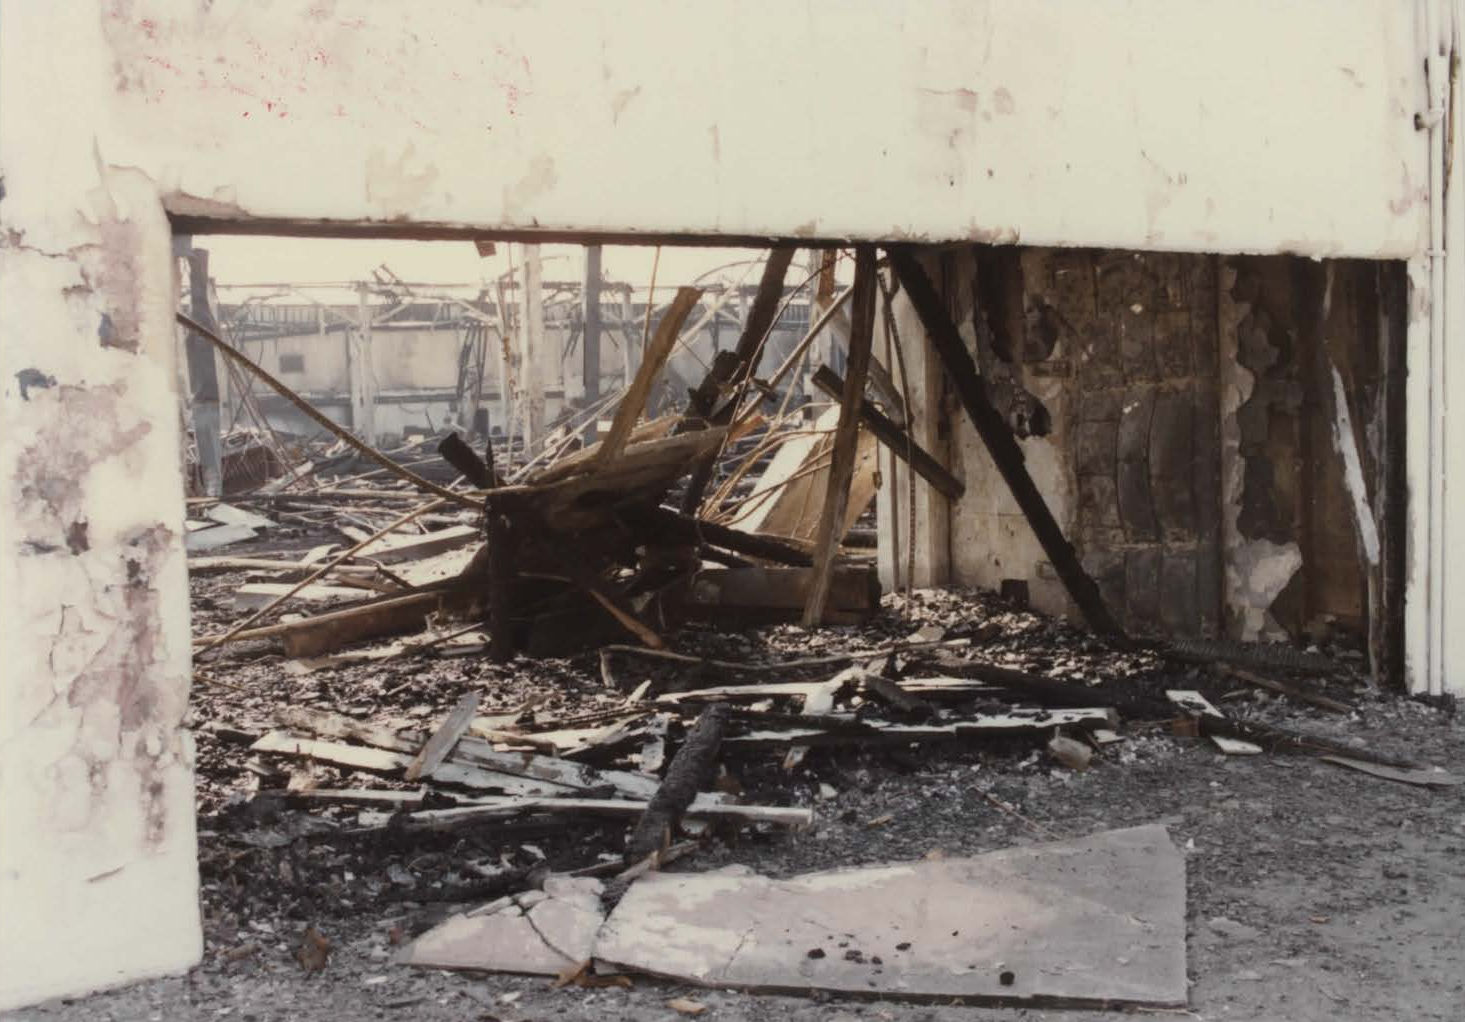 Pan Pacific Auditorium, Los Angeles California After the fire (1989)